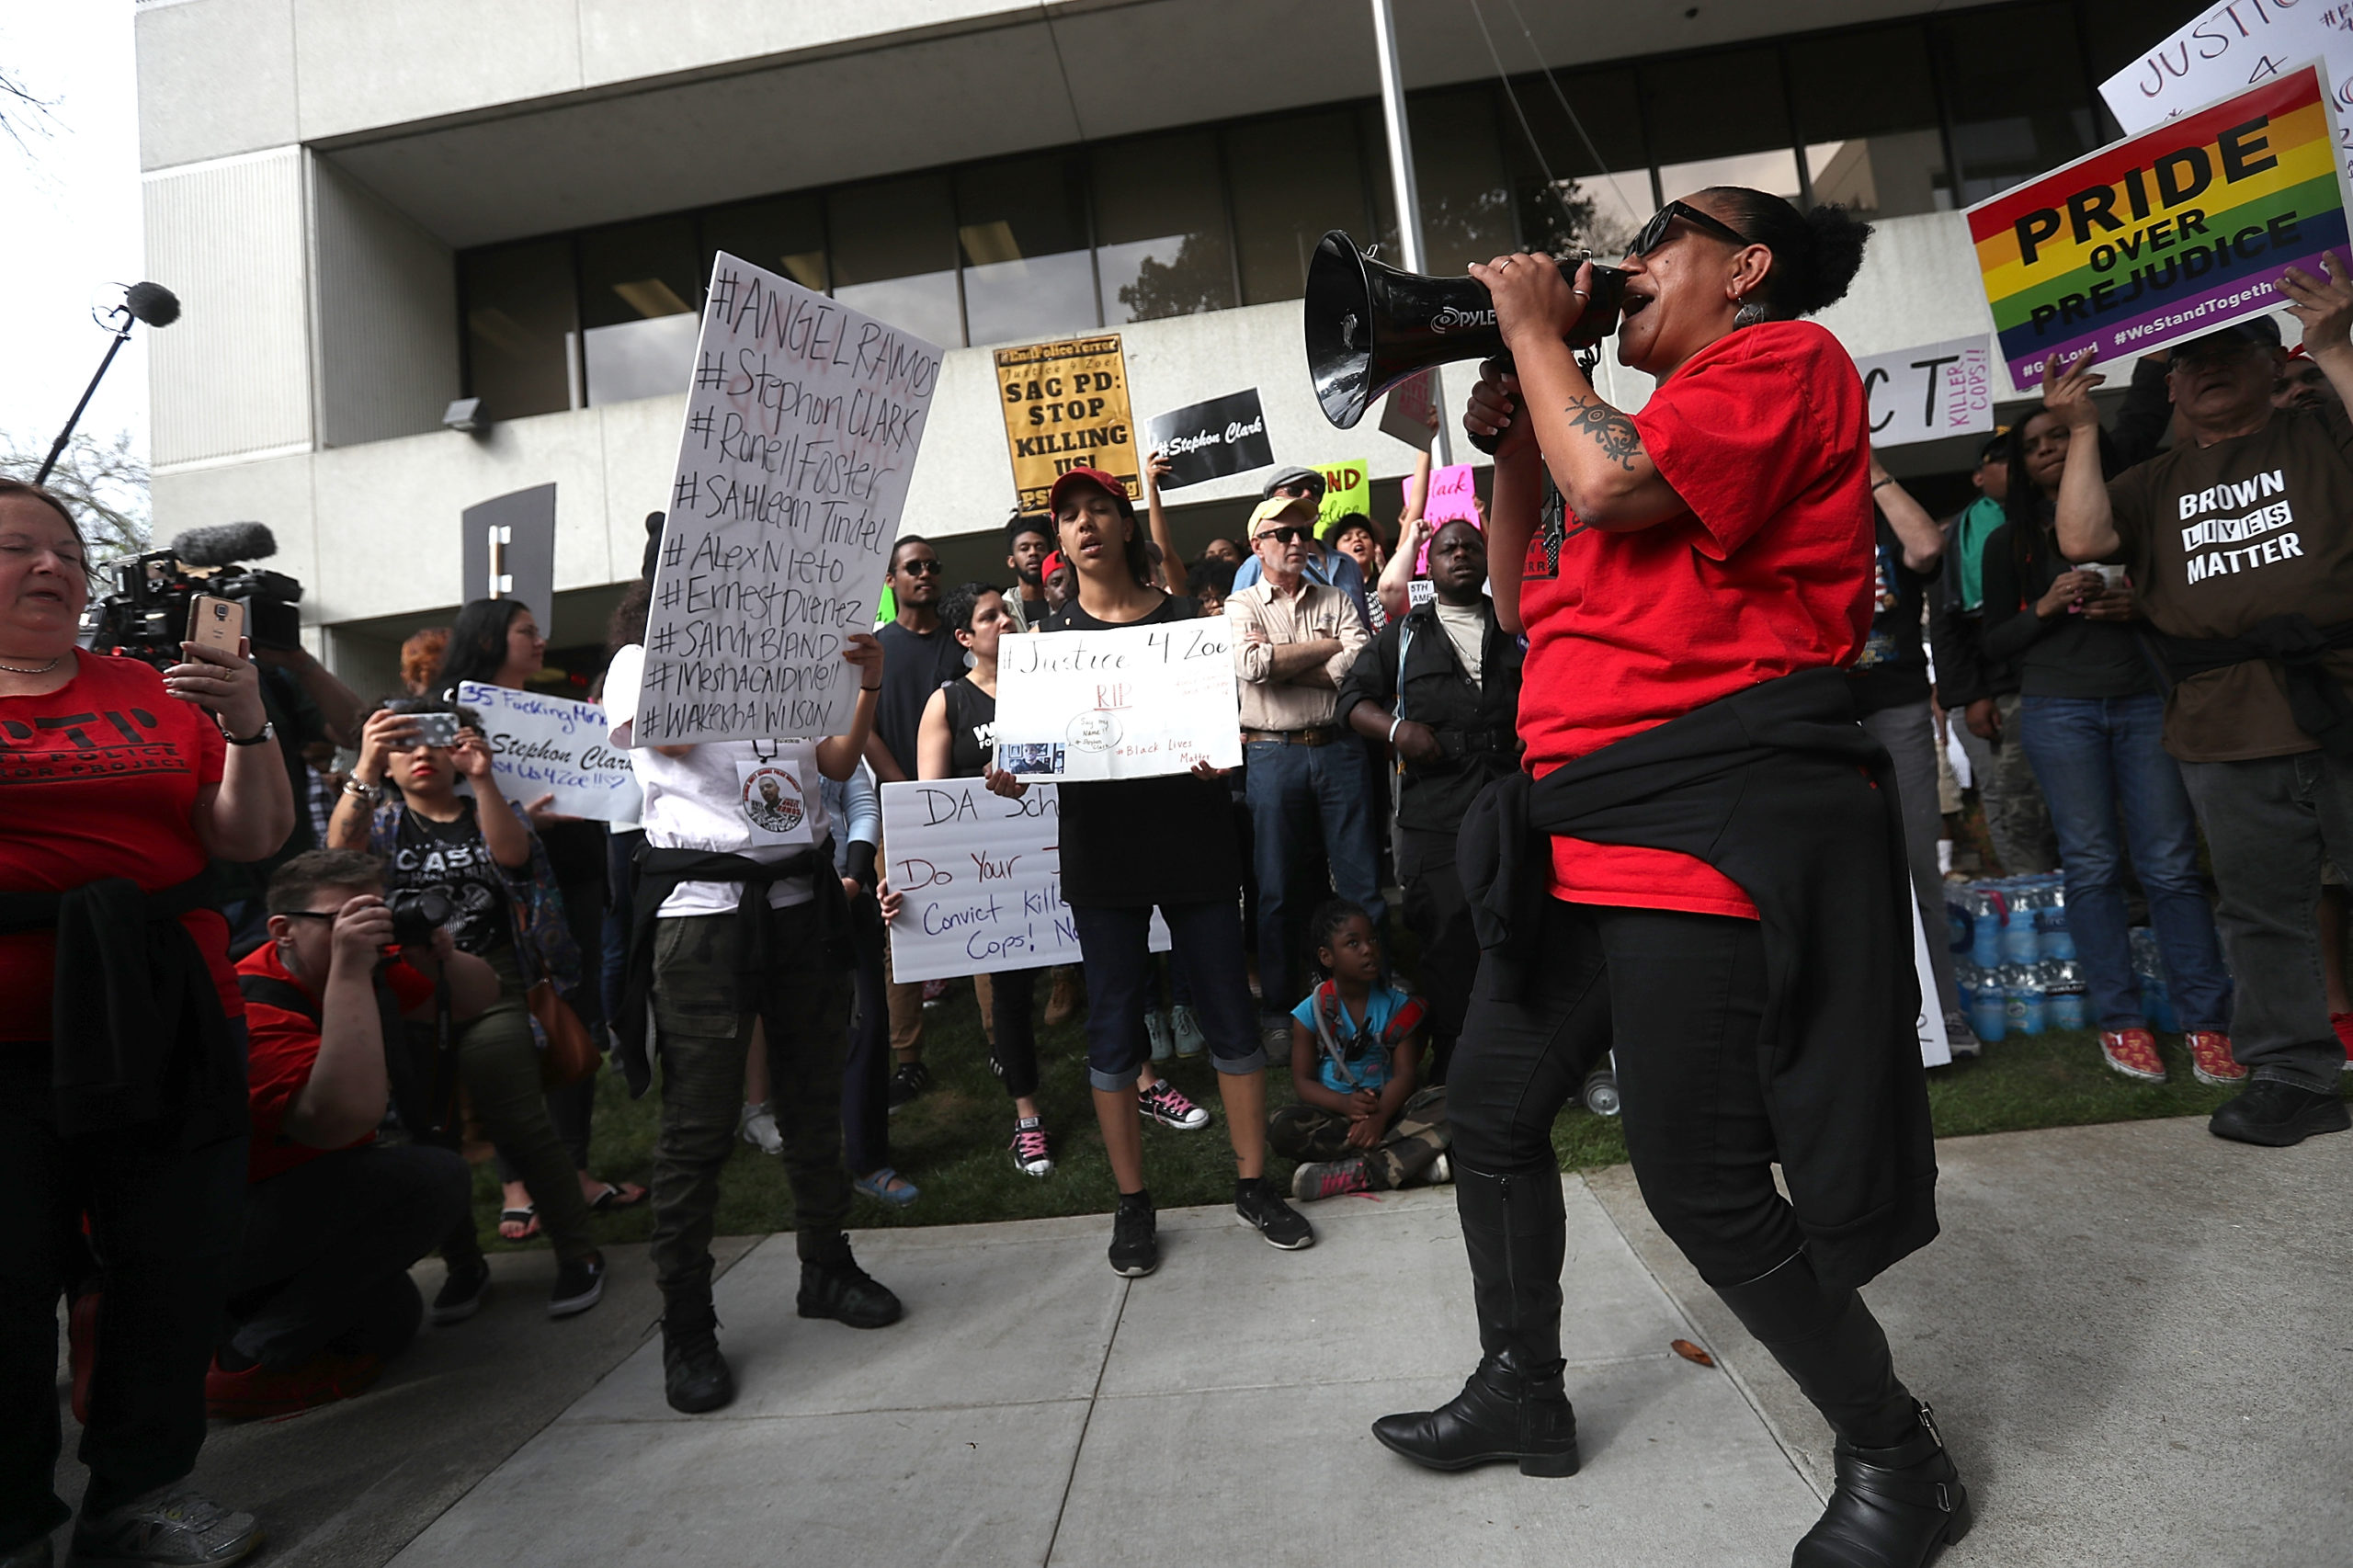 Black Lives Matter protesters stage a demonstration in front of the offices of Sacramento district attorney Anne Marie Schubert on April 4, 2018 in Sacramento, California. Over 100 Black Lives Matter protesters rallied during a day of action outside of the Sacramento district attorney office demanding justice for Stephon Clark, an unarmed black man who was shot and killed by Sacramento police on March 18. (Photo by Justin Sullivan/Getty Images)